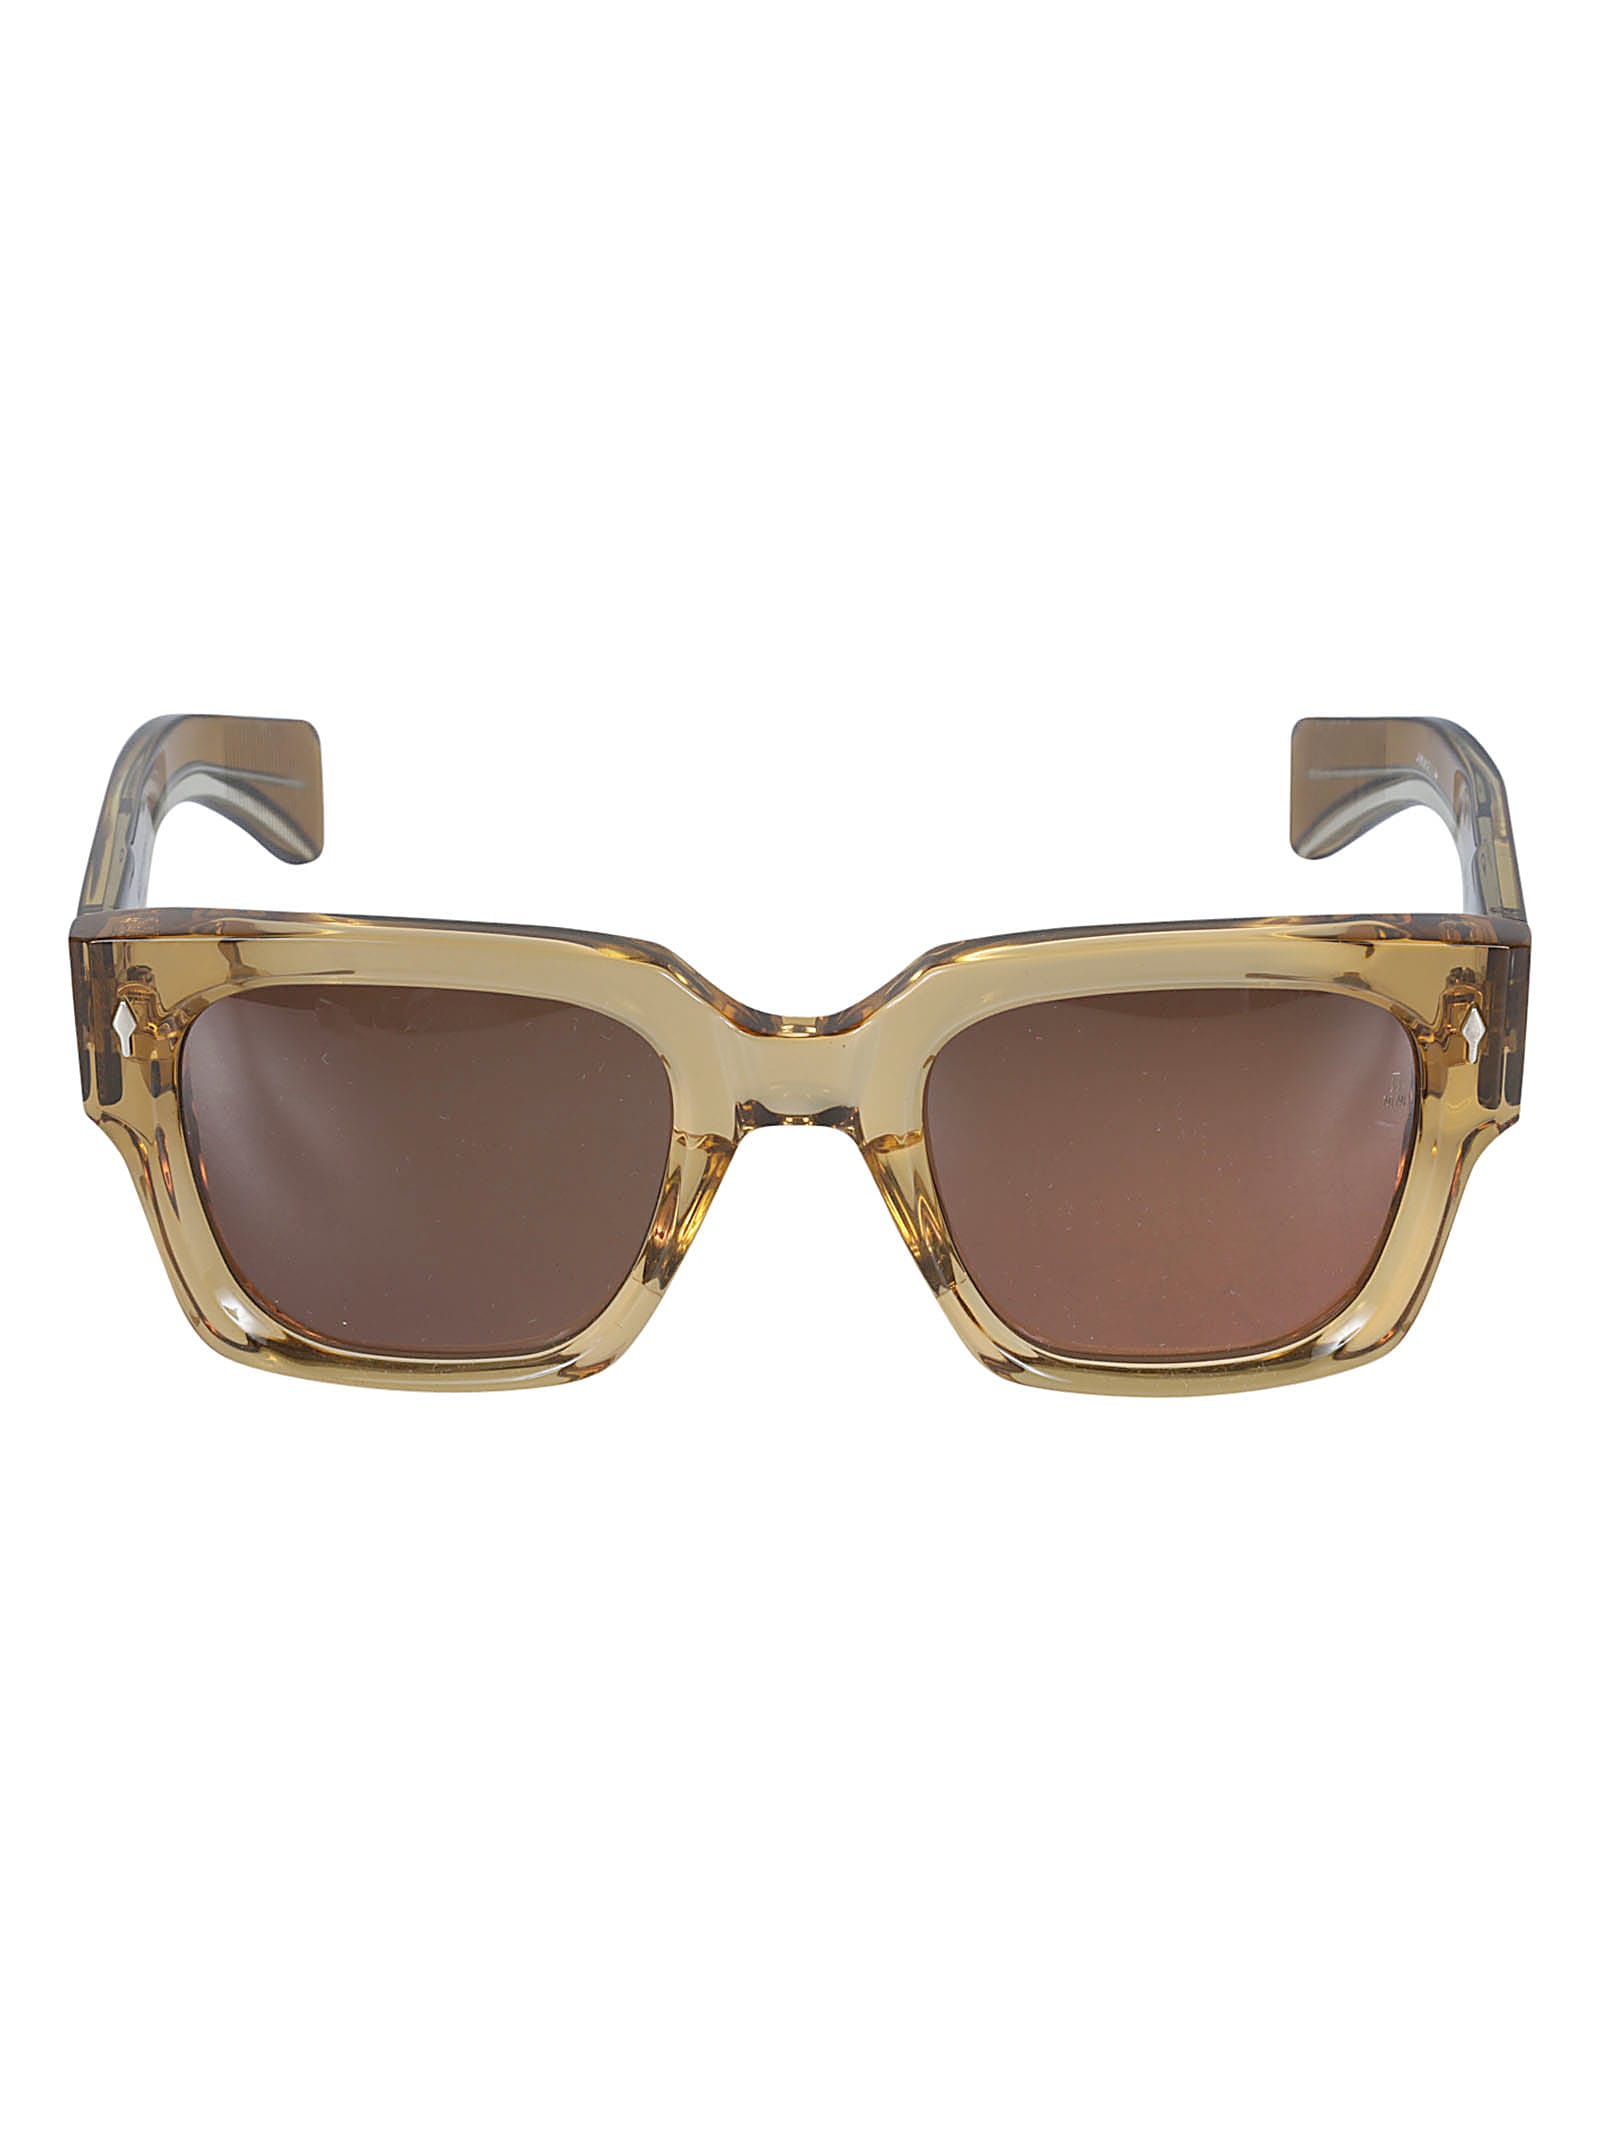 Jacques Marie Mage Enzo Sunglasses